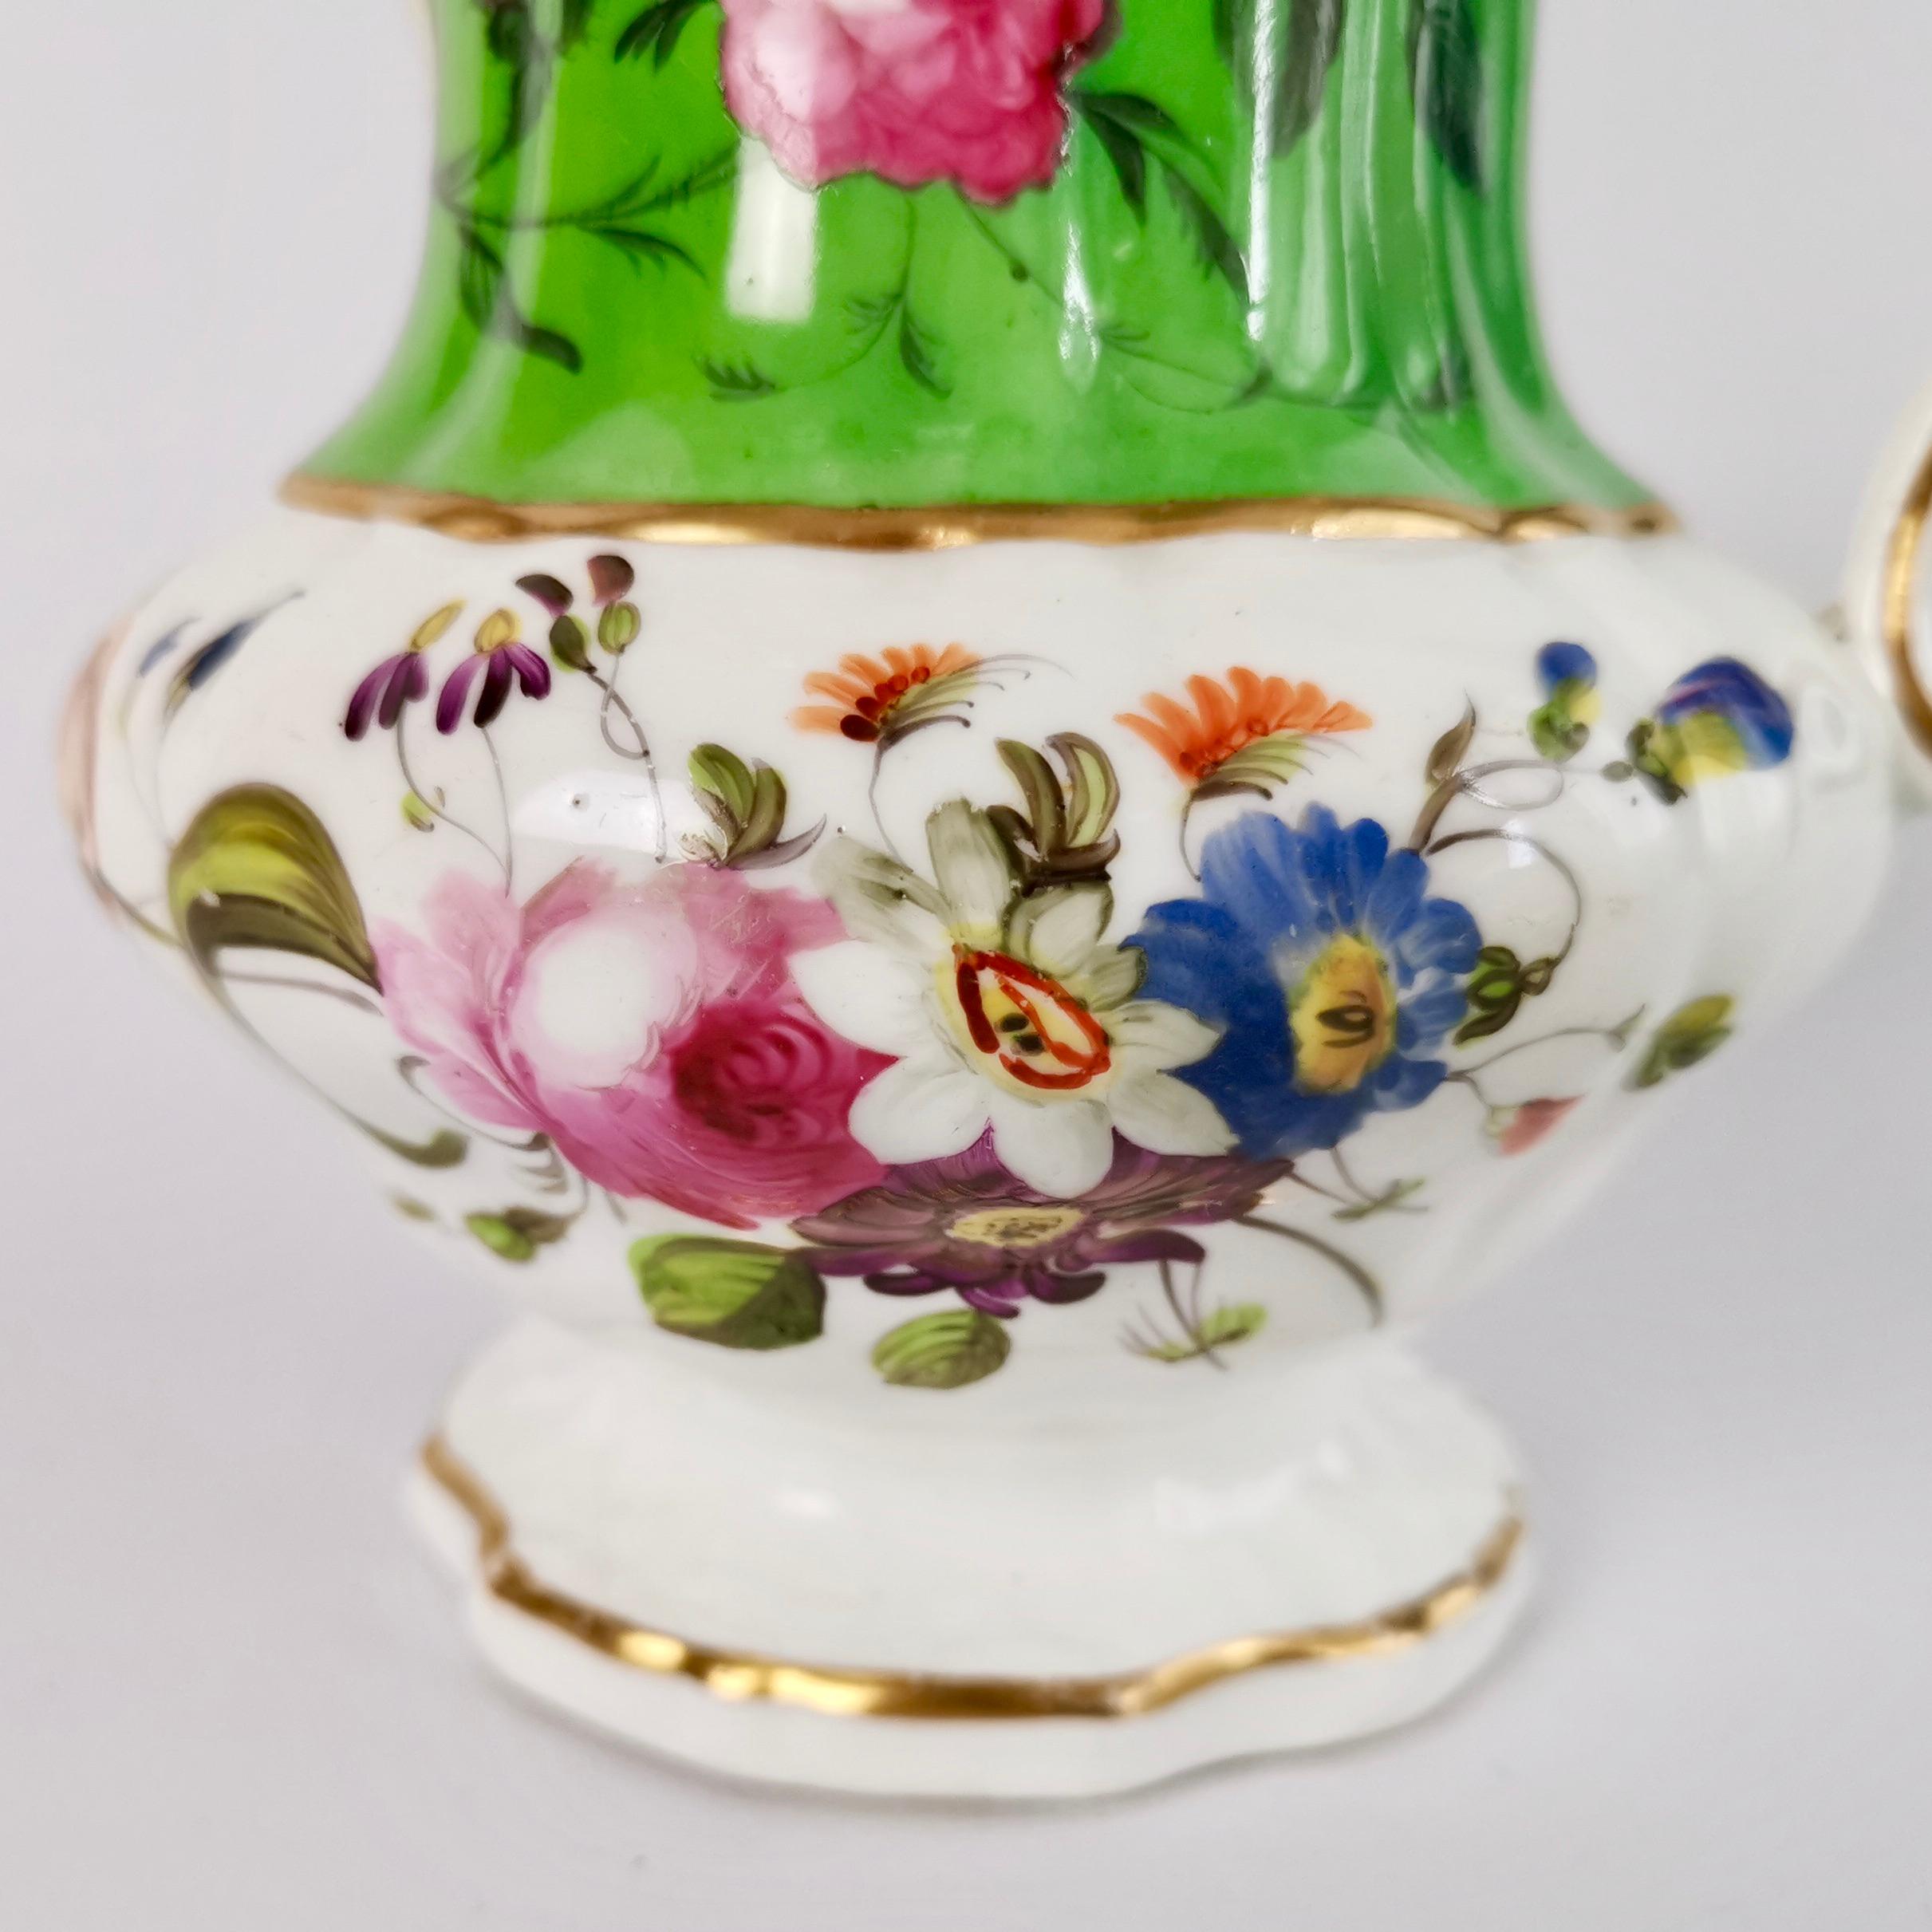 Hand-Painted Hilditch Porcelain Pitcher, Apple Green with Hand Painted Flowers, circa 1830